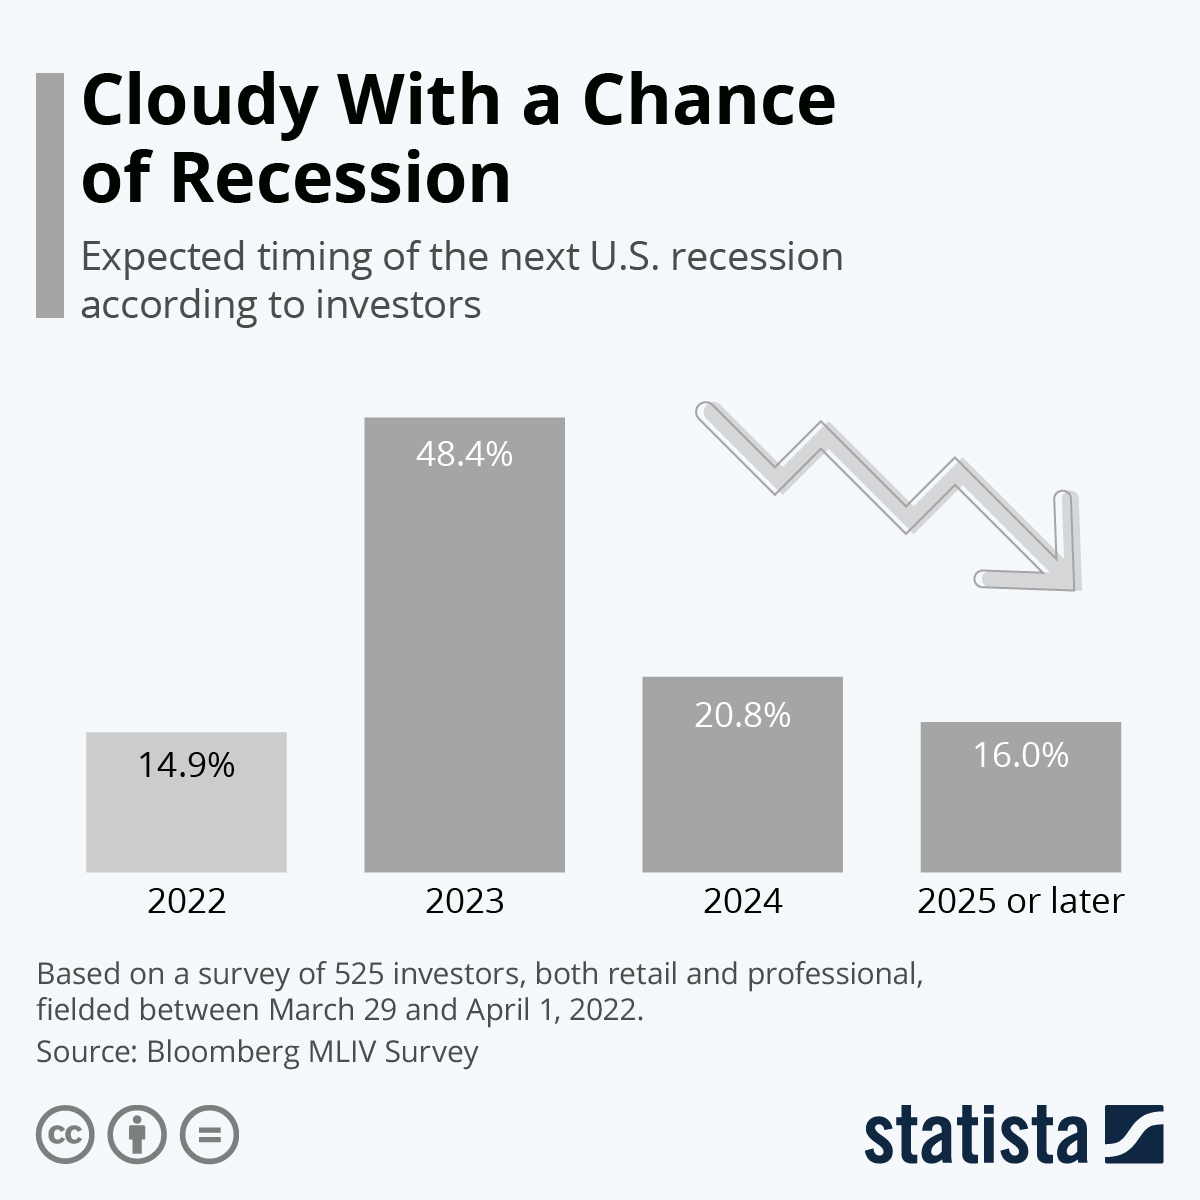 Cloudy With a Chance of Recession
